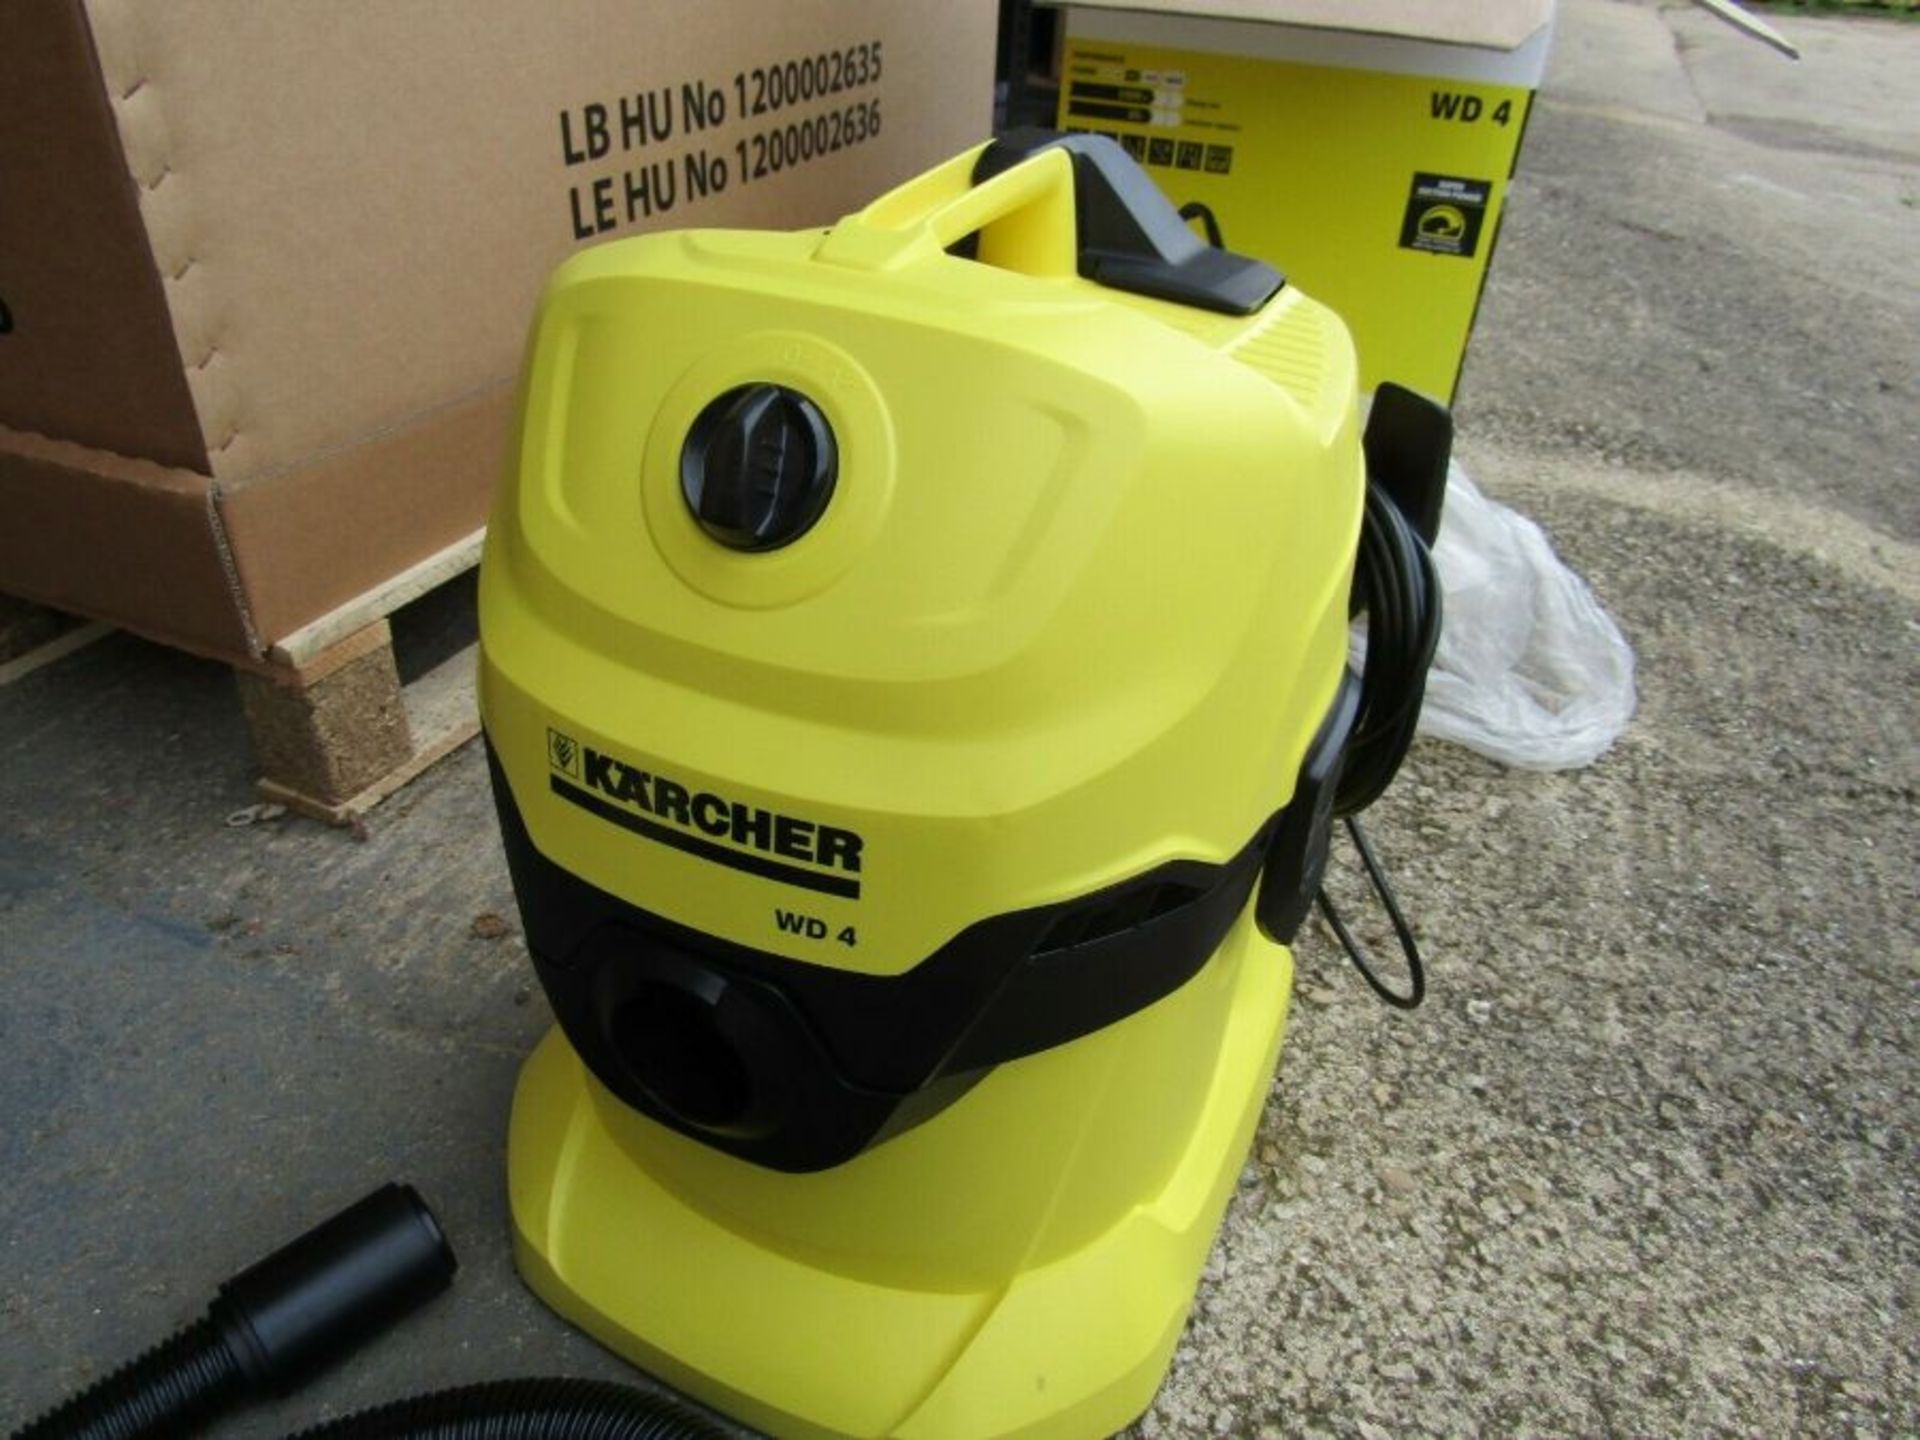 NEW Karcher WD 4 Wet and Dry Vacuum Cleaner - Yellow - UK Plug Blk 1931654